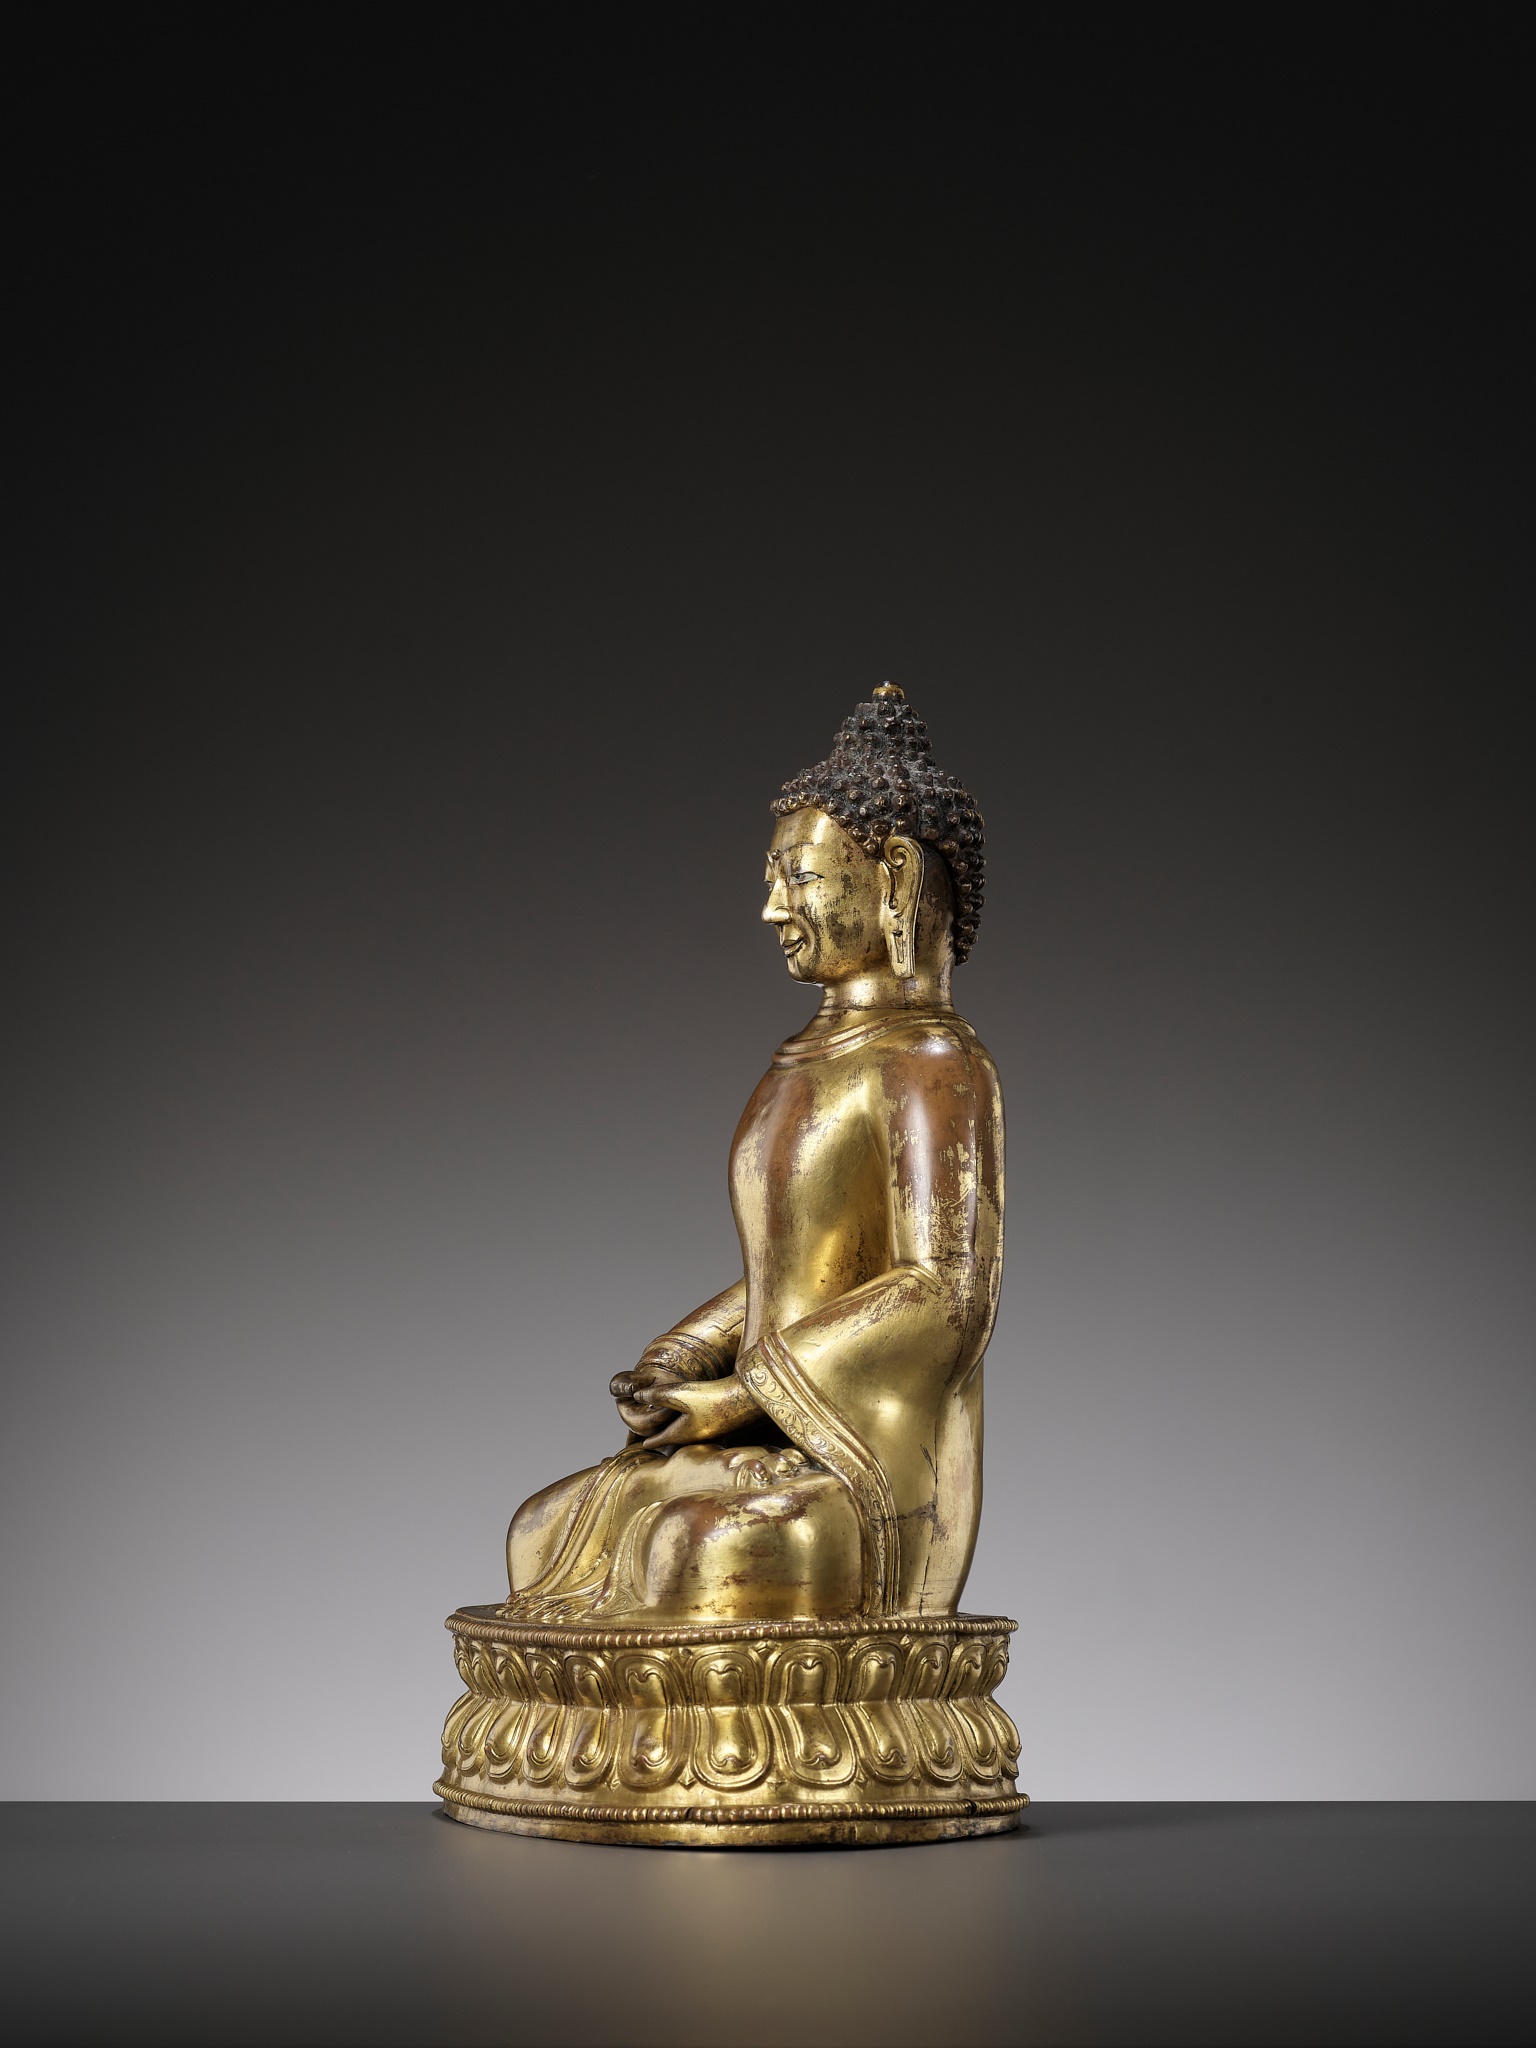 A GILT COPPER-ALLOY REPOUSSE FIGURE OF BUDDHA AMITABHA, WITH AN INSCRIPTION REFERRING TO THE SECOND - Image 11 of 16